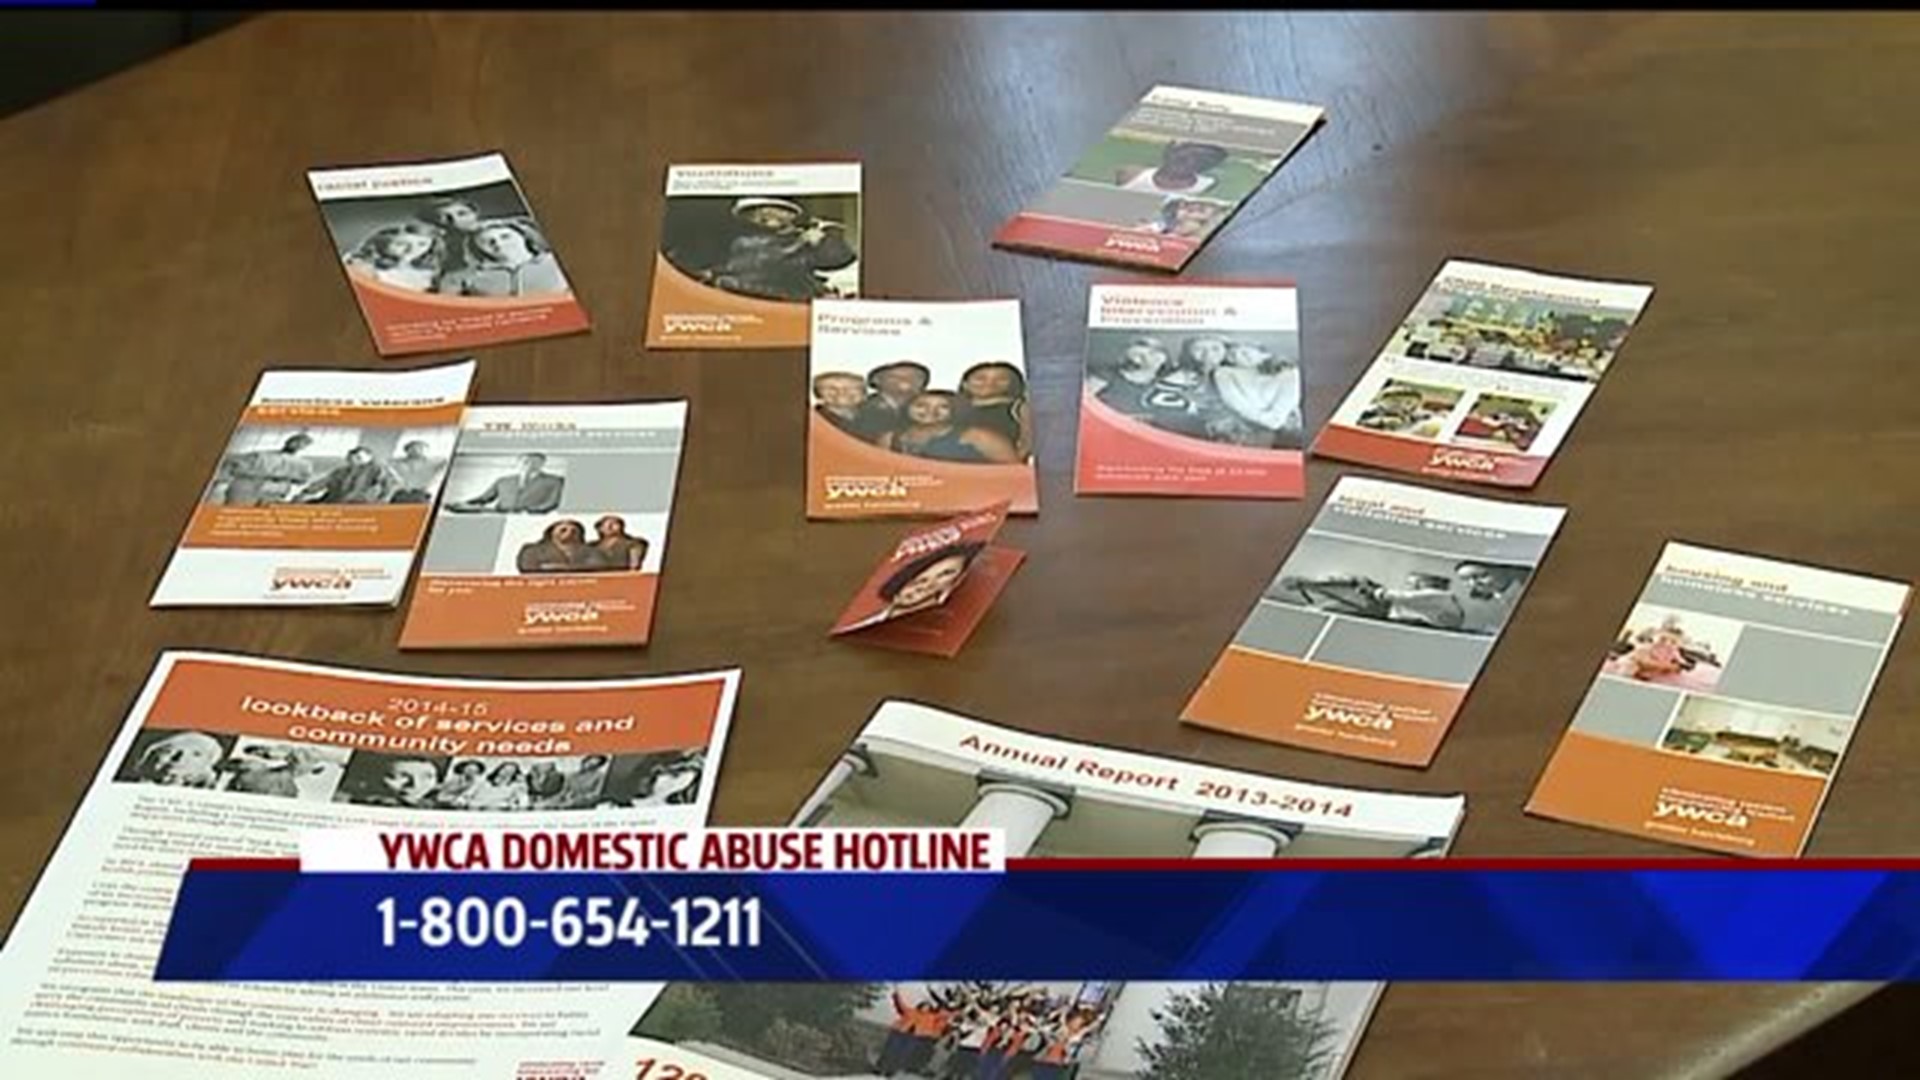 Domestic abuse hotline for help